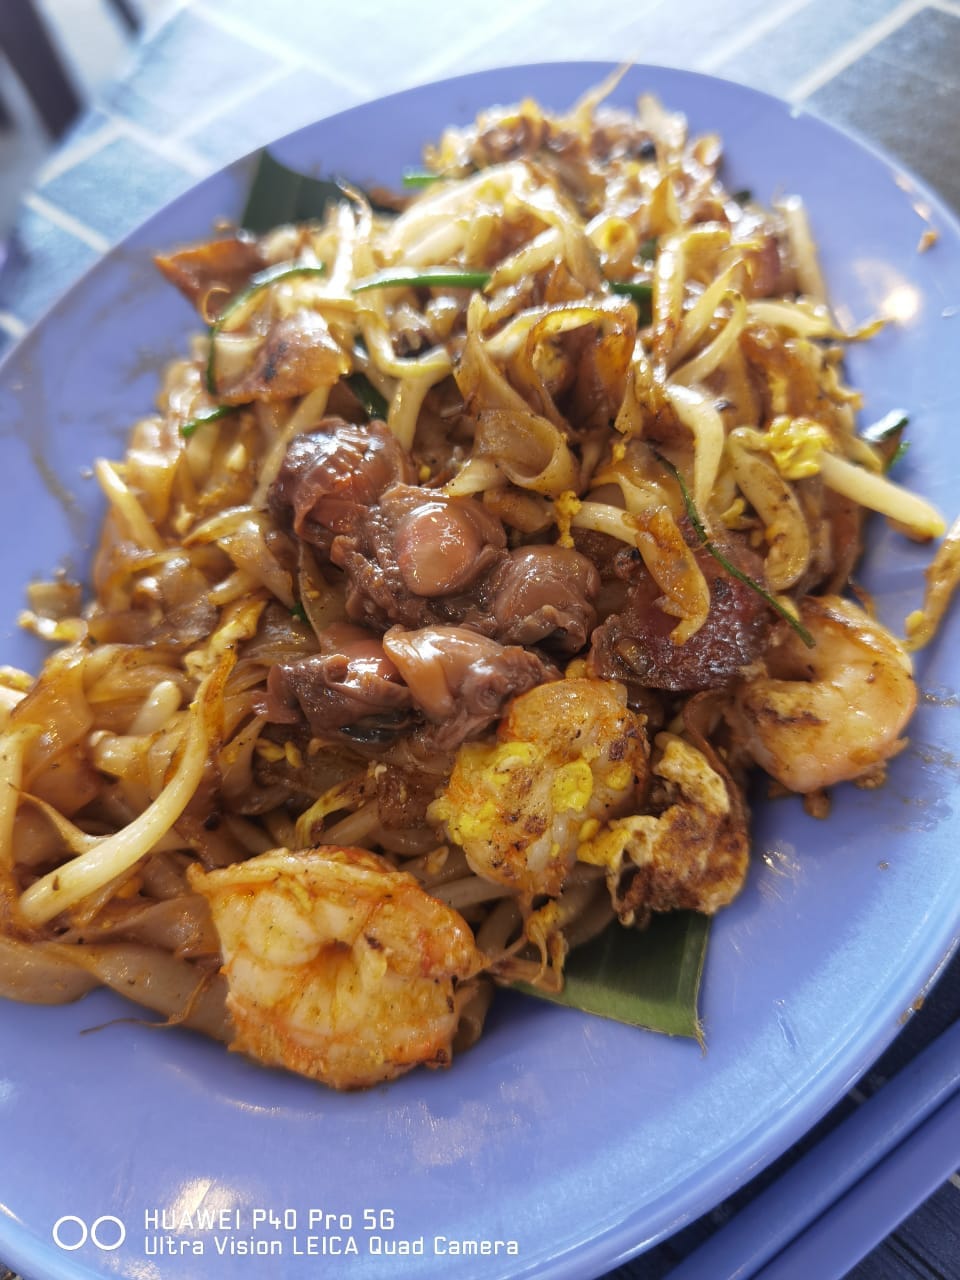 Wawasan Cafe & Resthouse Char Koay Teow